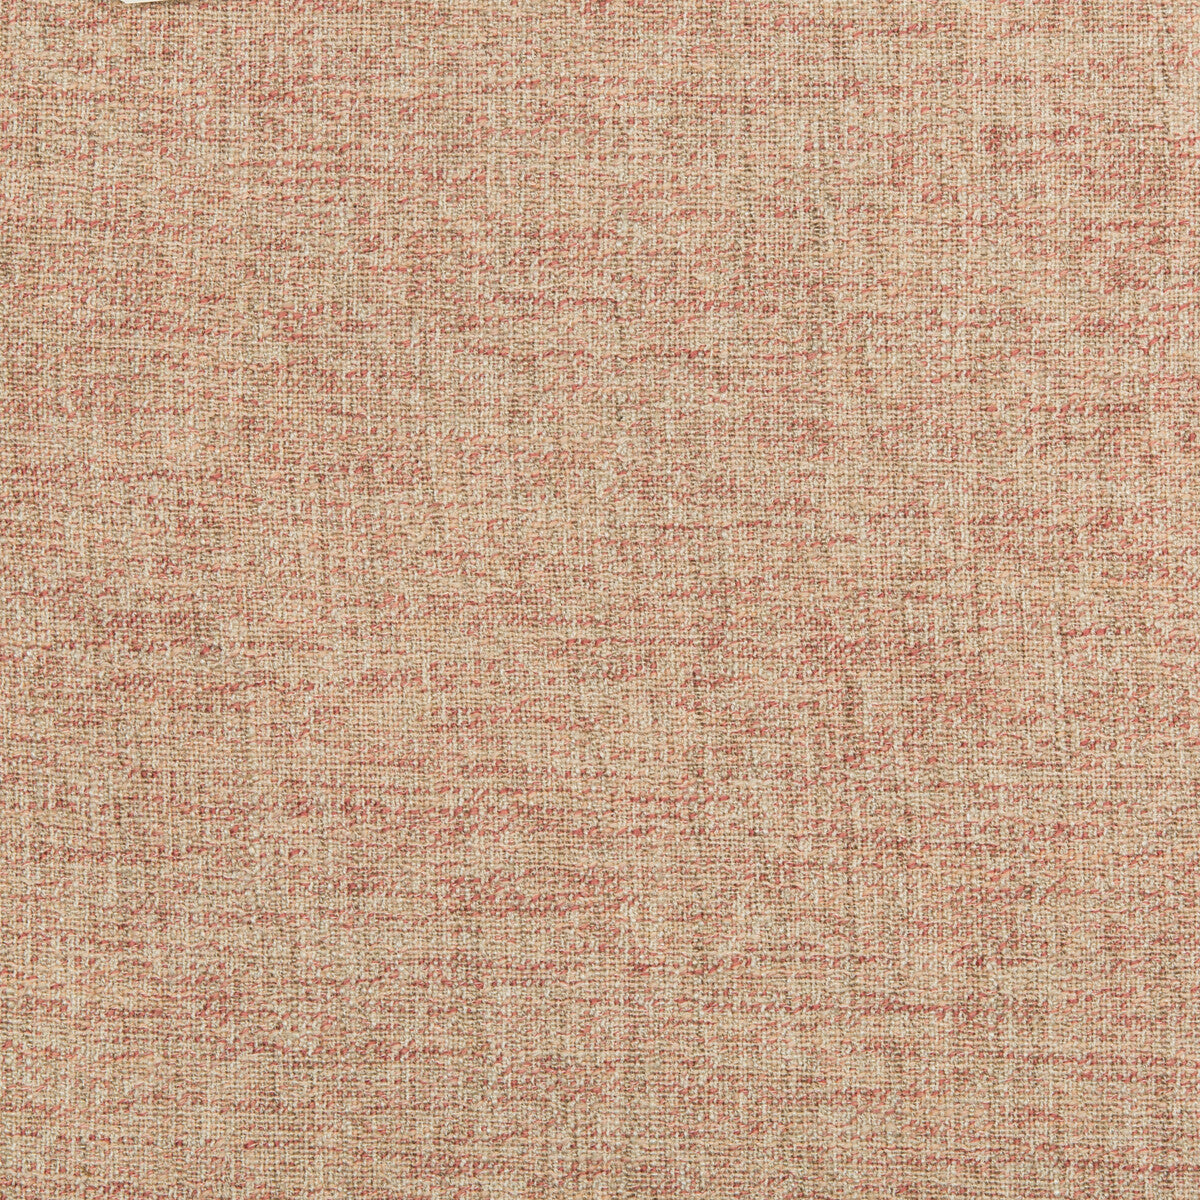 Good Sense fabric in pink sand color - pattern 35899.1216.0 - by Kravet Design in the Barbara Barry Home Midsummer collection